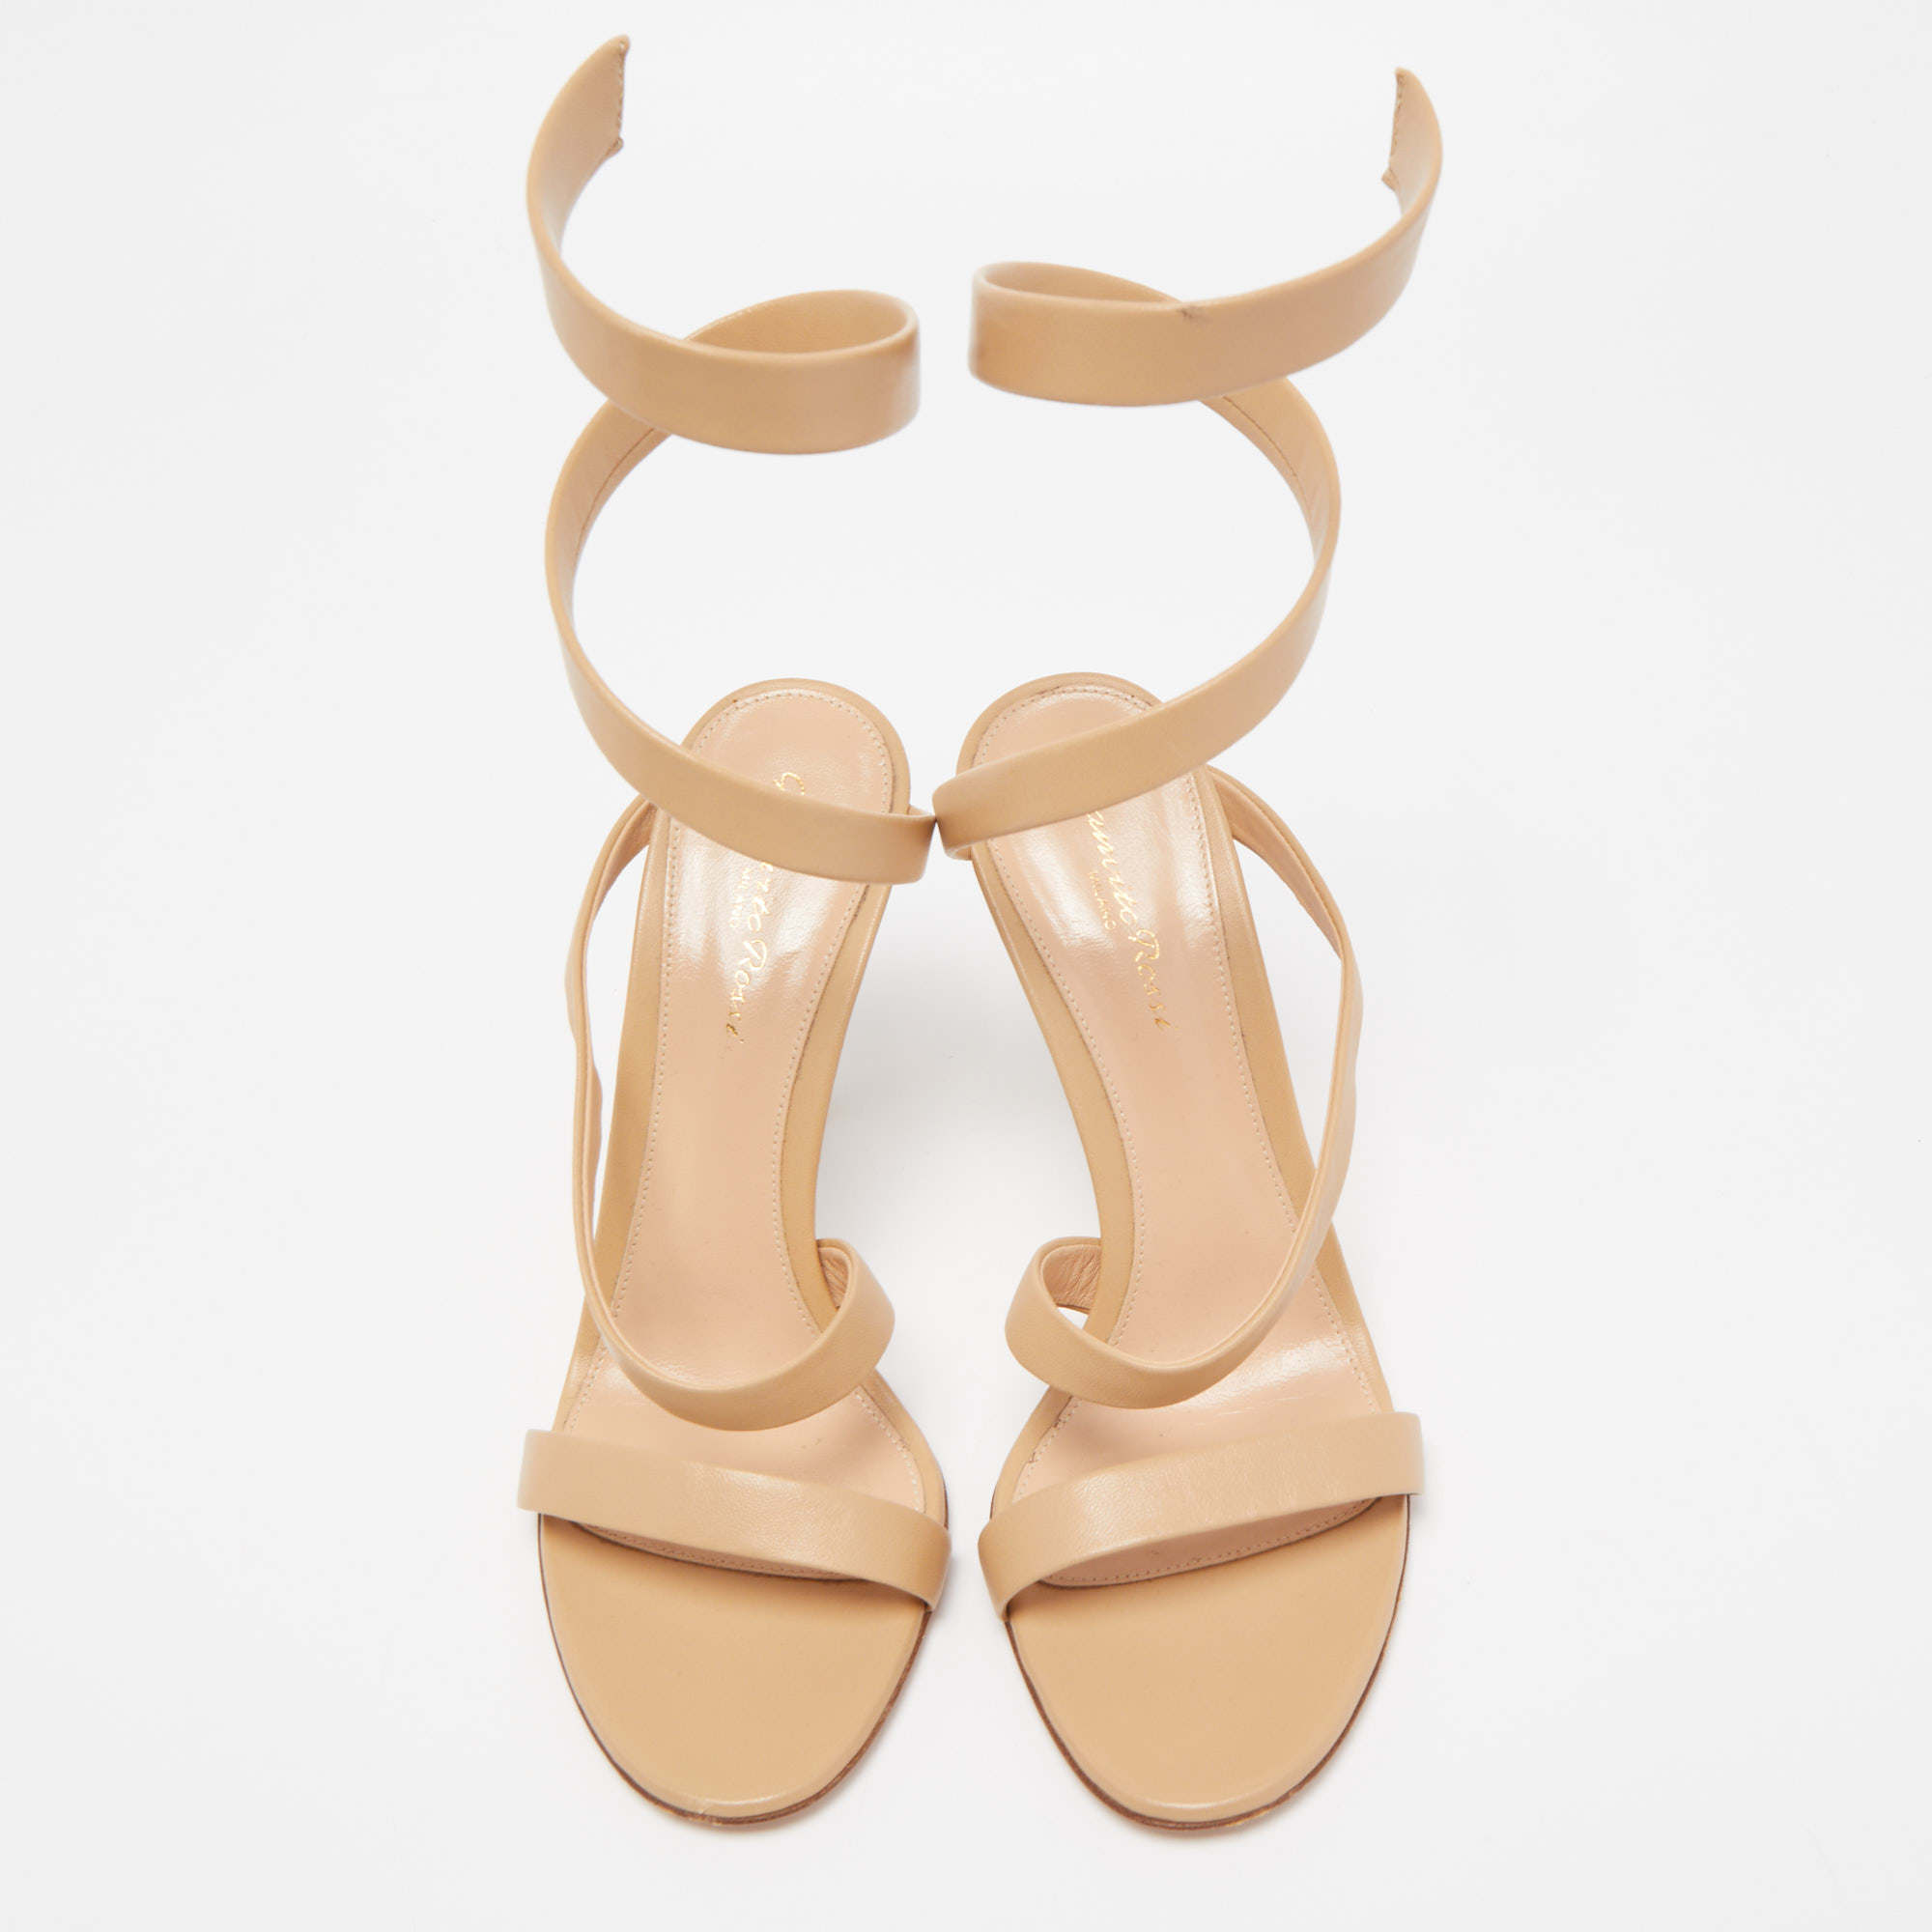 Gianvito Rossi Beige Leather Opera Twirl Ankle Wrap Sandals Size 38.5